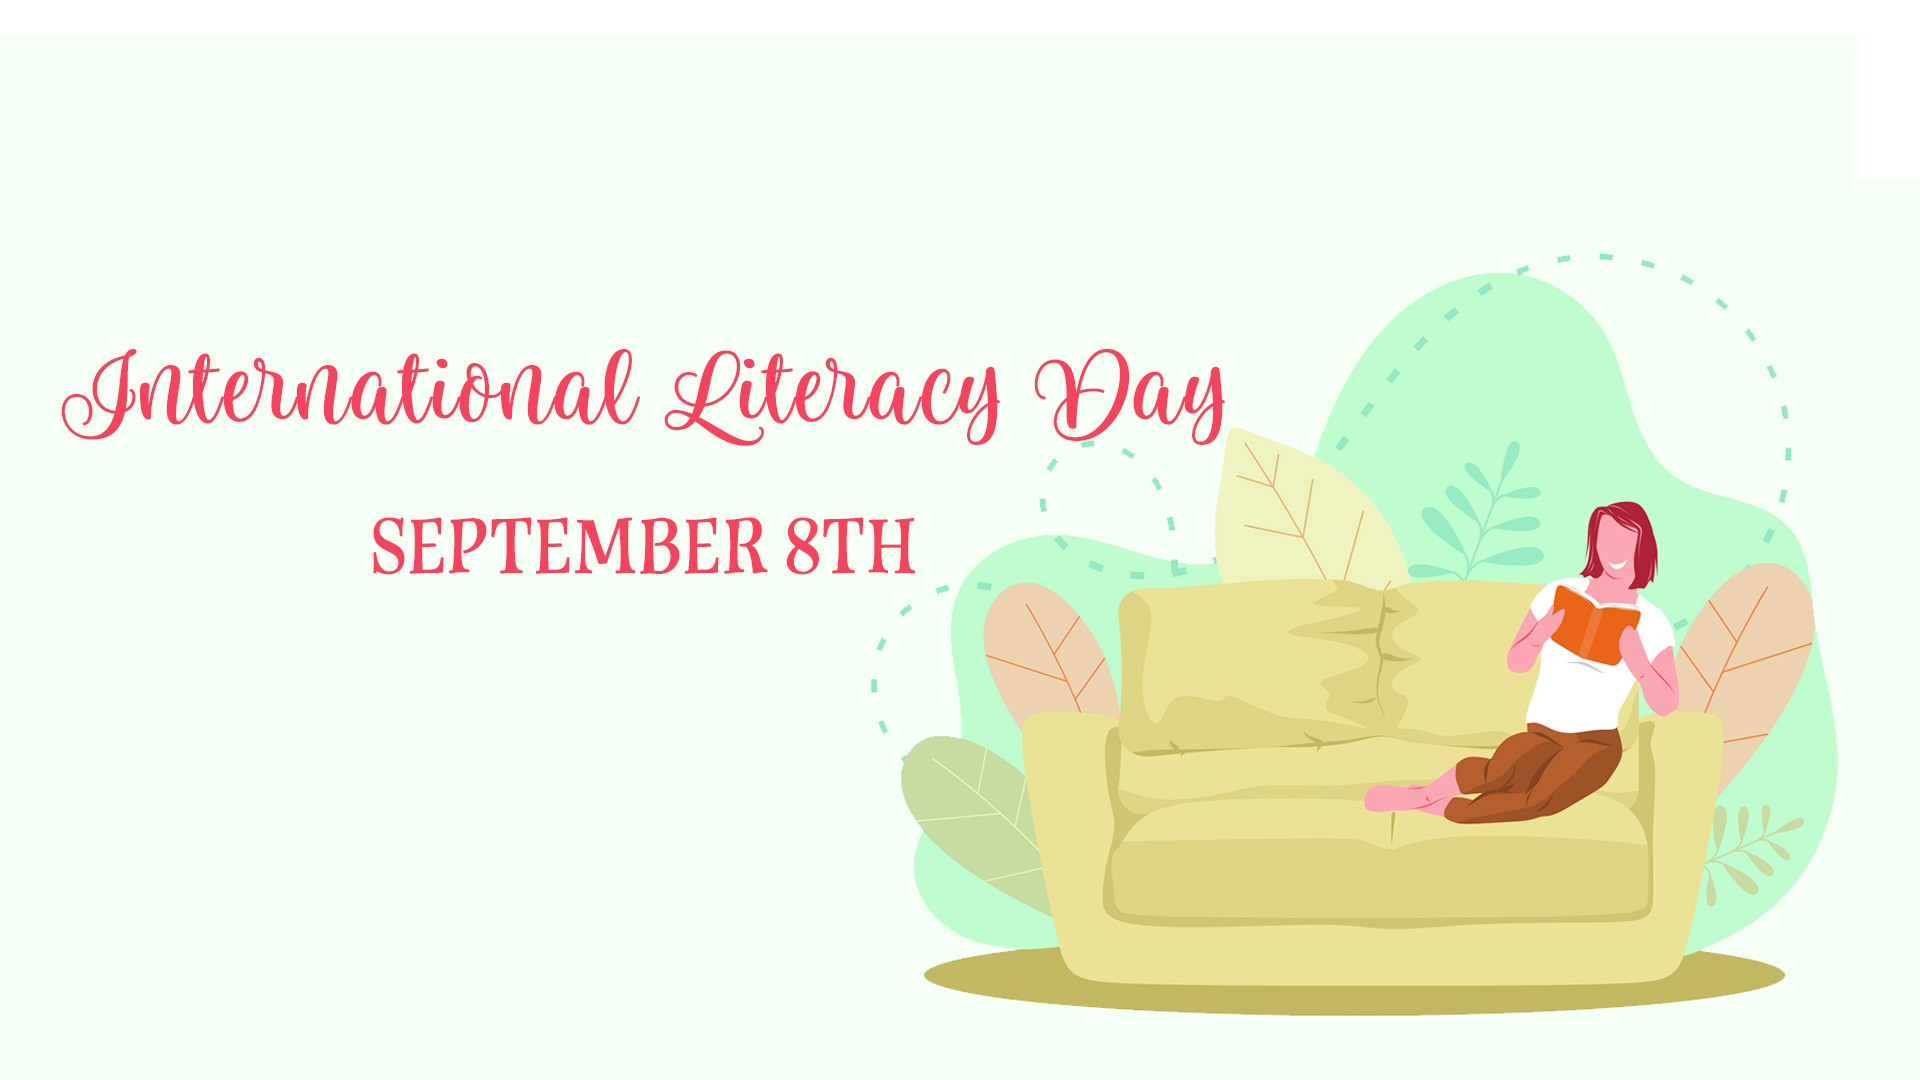 Pale green background with hot pink script letters read International Literacy Day on the center left of the image. Below reads September 8th in hot pink all capital decorative serif font. An illustation of a girl with pink skin, red hair, white shirt, and brown pants sits on a light chartreuse green couch. The person is reading an orange book. Green floor and background with orange, green, and yellow leafs behind the couch.